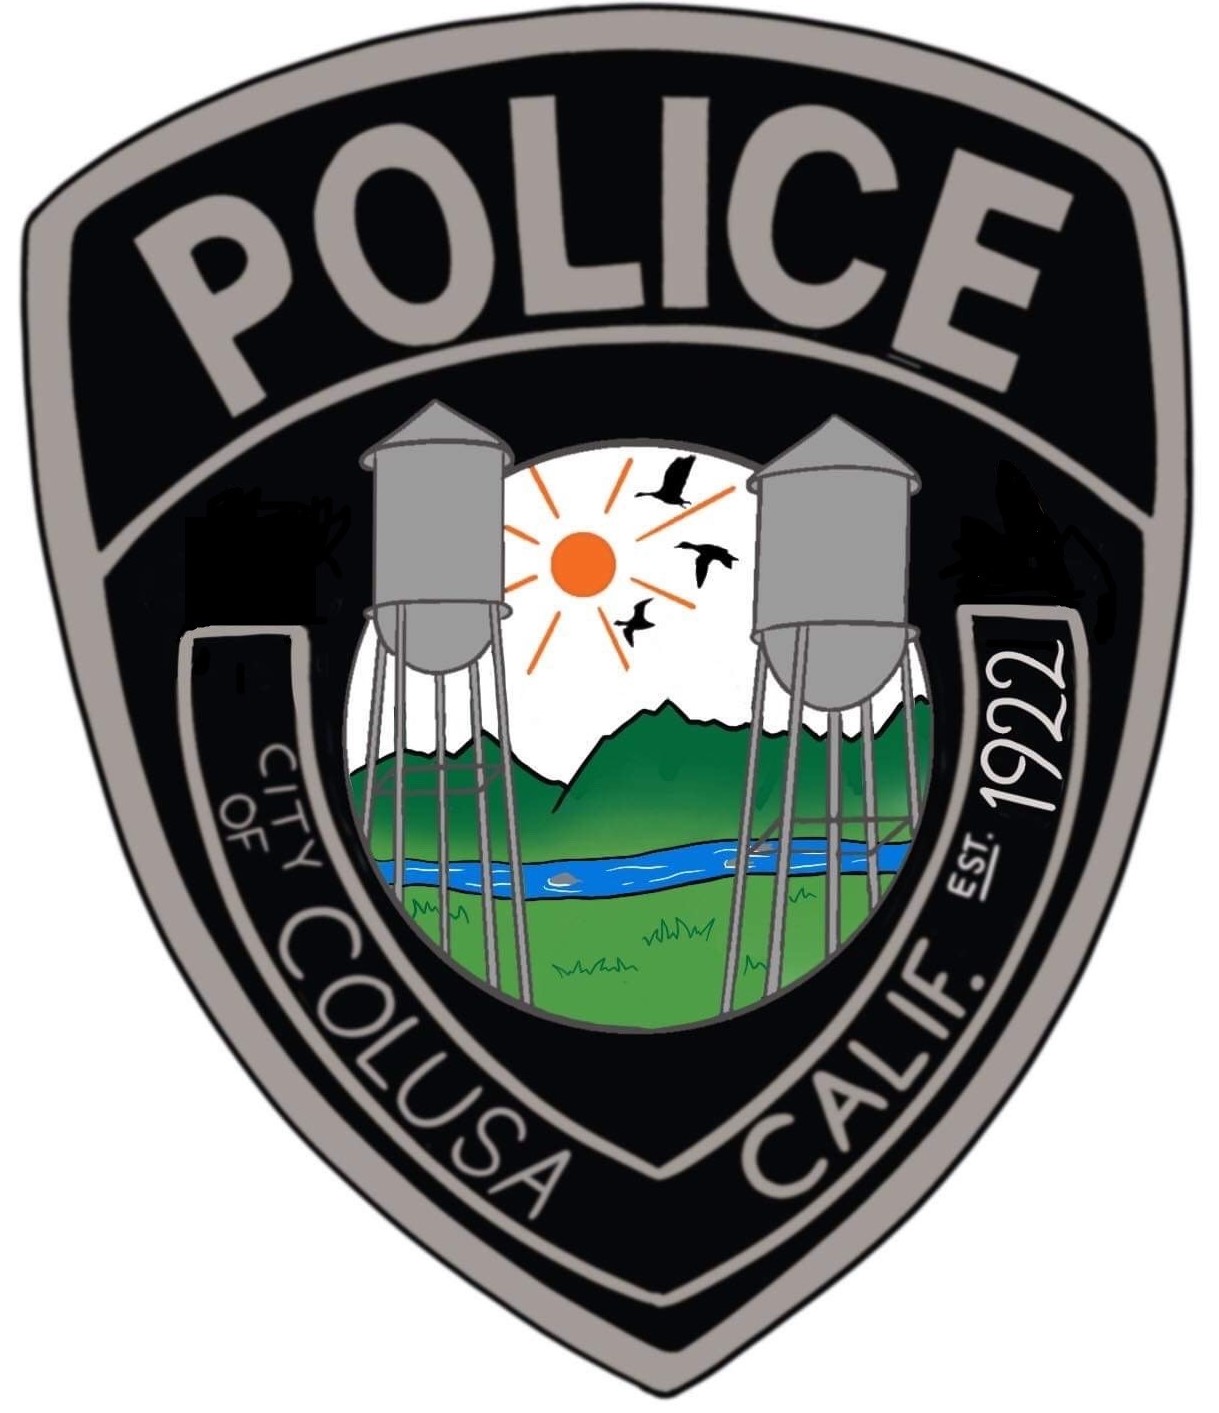 Police Department City of Colusa